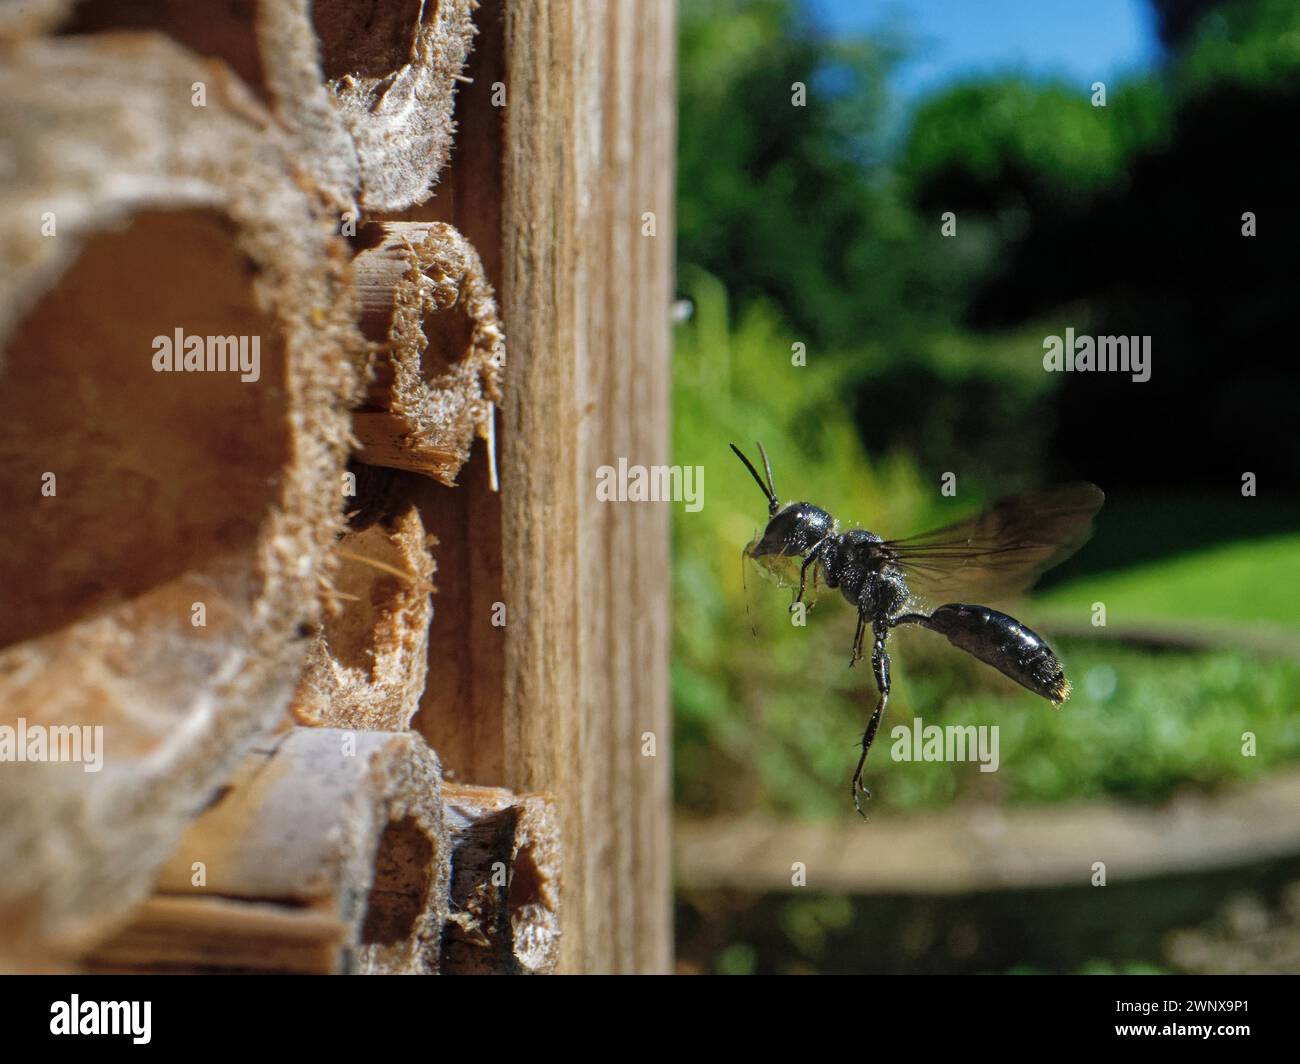 Aphid wasp (Pemphredon sp.) flying to its nest in an insect hotel with a paralysed Rose aphid (Macrosiphum rosae) to feed its larvae, Wiltshire, UK. Stock Photo